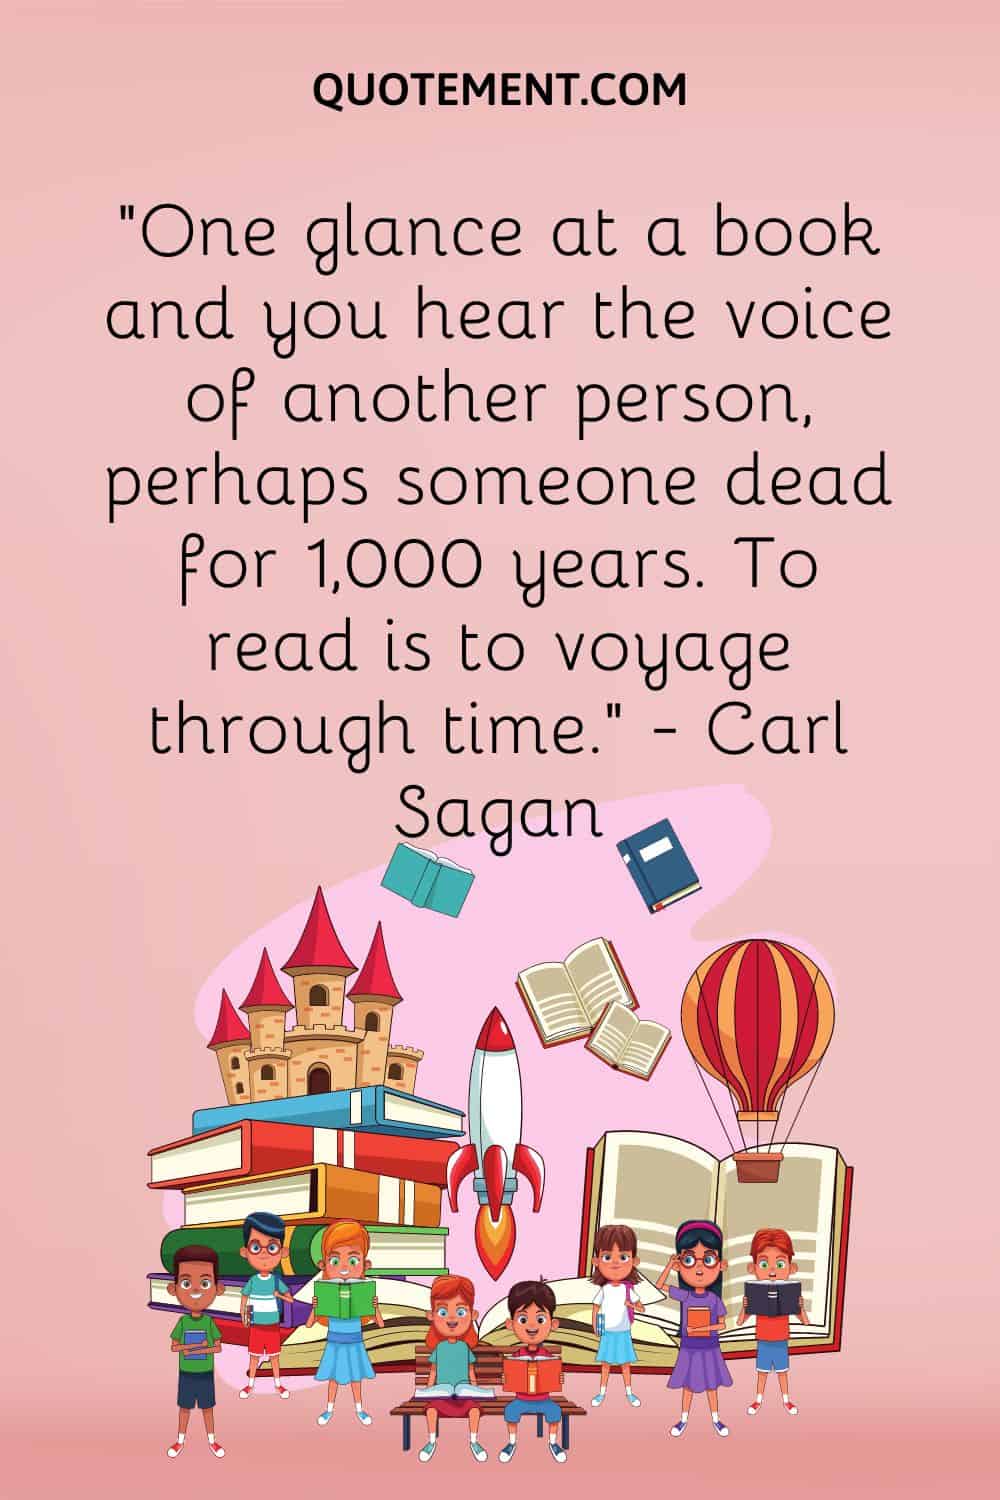 “One glance at a book and you hear the voice of another person, perhaps someone dead for 1,000 years. To read is to voyage through time.” — Carl Sagan